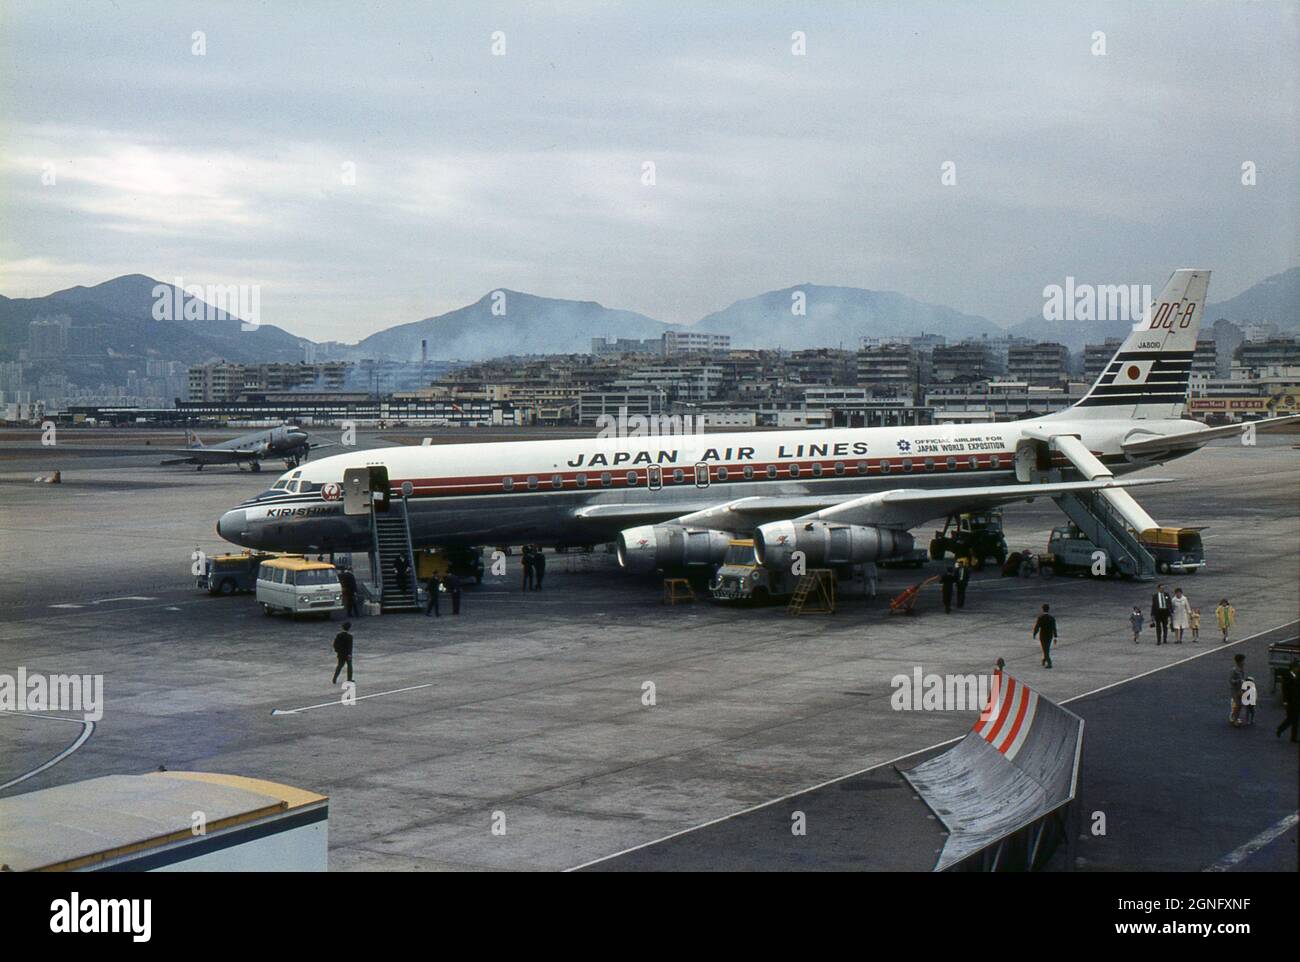 Japan Air Lines Douglas DC-8 Airliner ‘Kirishima’(JA8010) being made ready for flight at Kai Tak Airport, Hong Kong in 1968. The aircraft has the advertising slogan, “Official Airline for Japan World Exposition” painted on its fuselage, promoting the forthcoming ‘Expo '70’, the world's fair held in Suita, Osaka, Japan in 1970. Passengers are walking towards the terminal building, having disembarked from the aircraft. An ageing Douglas DC-3 propeller-driven airliner is parked in the distance. Stock Photo